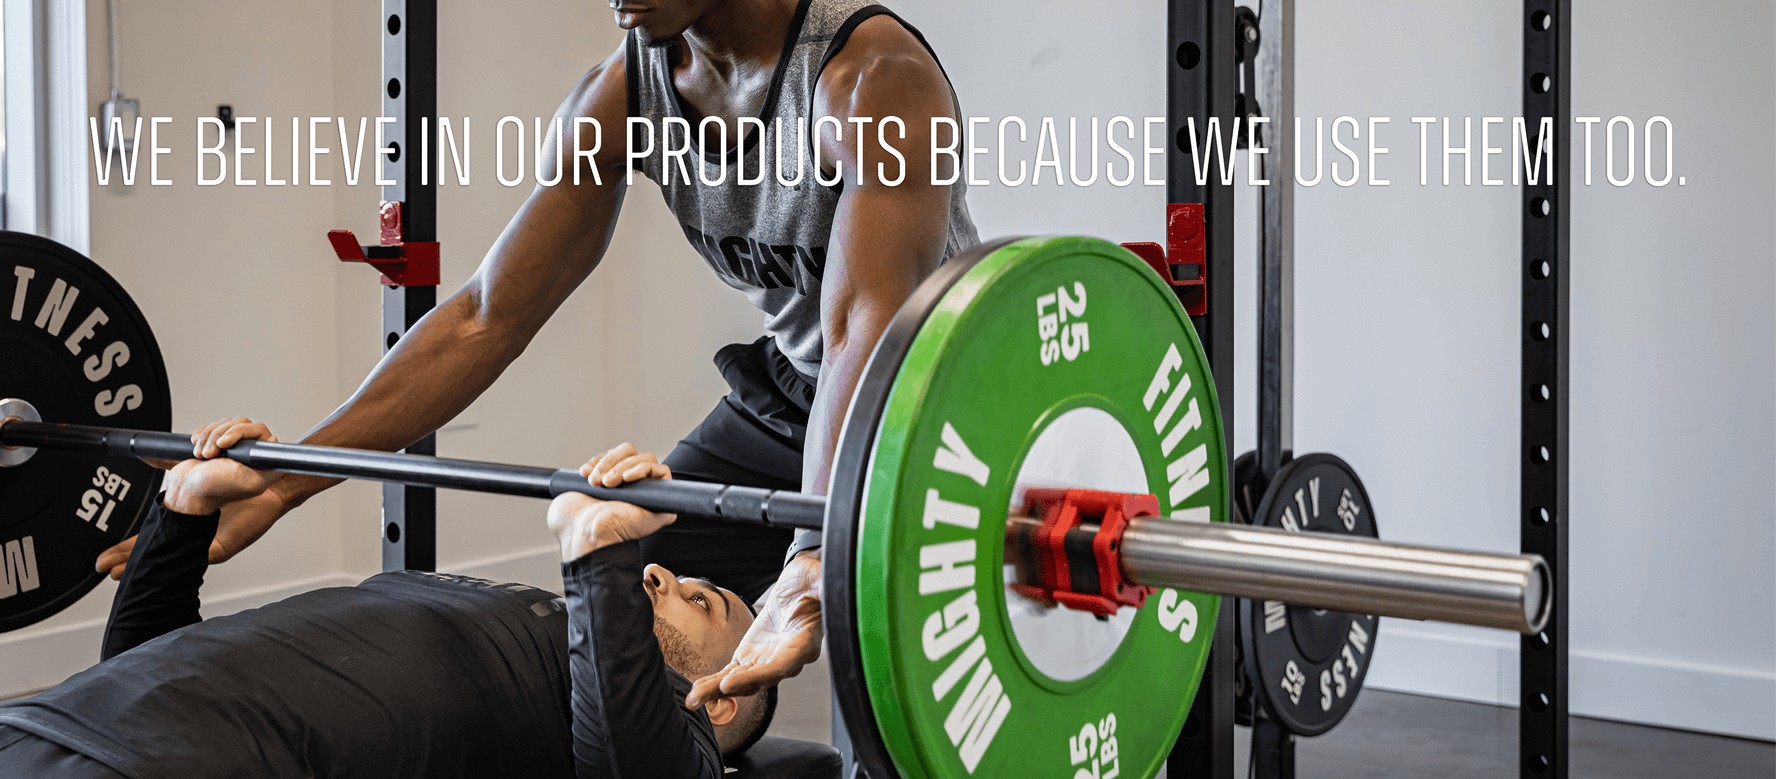 Mighty Fitness - We believe in our products because we use them too. 